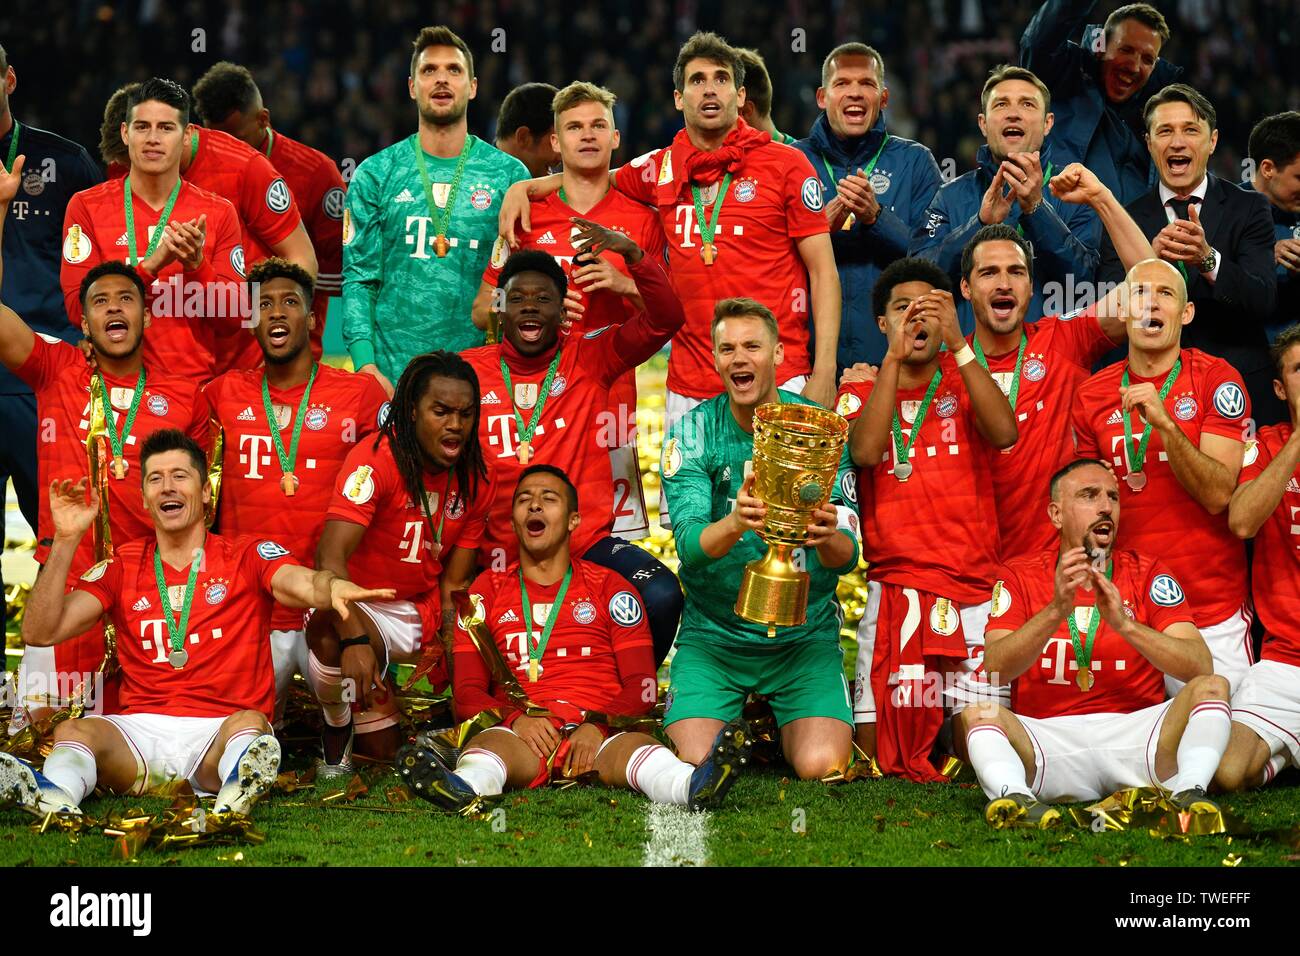 Group Photo FC Bayern wins DFB Cup, 76th DFB Cup Final RB Leipzig, RBL,  against FC Bayern Munich, FCB, Olympic stadion Berlin, Germany Stock Photo  - Alamy